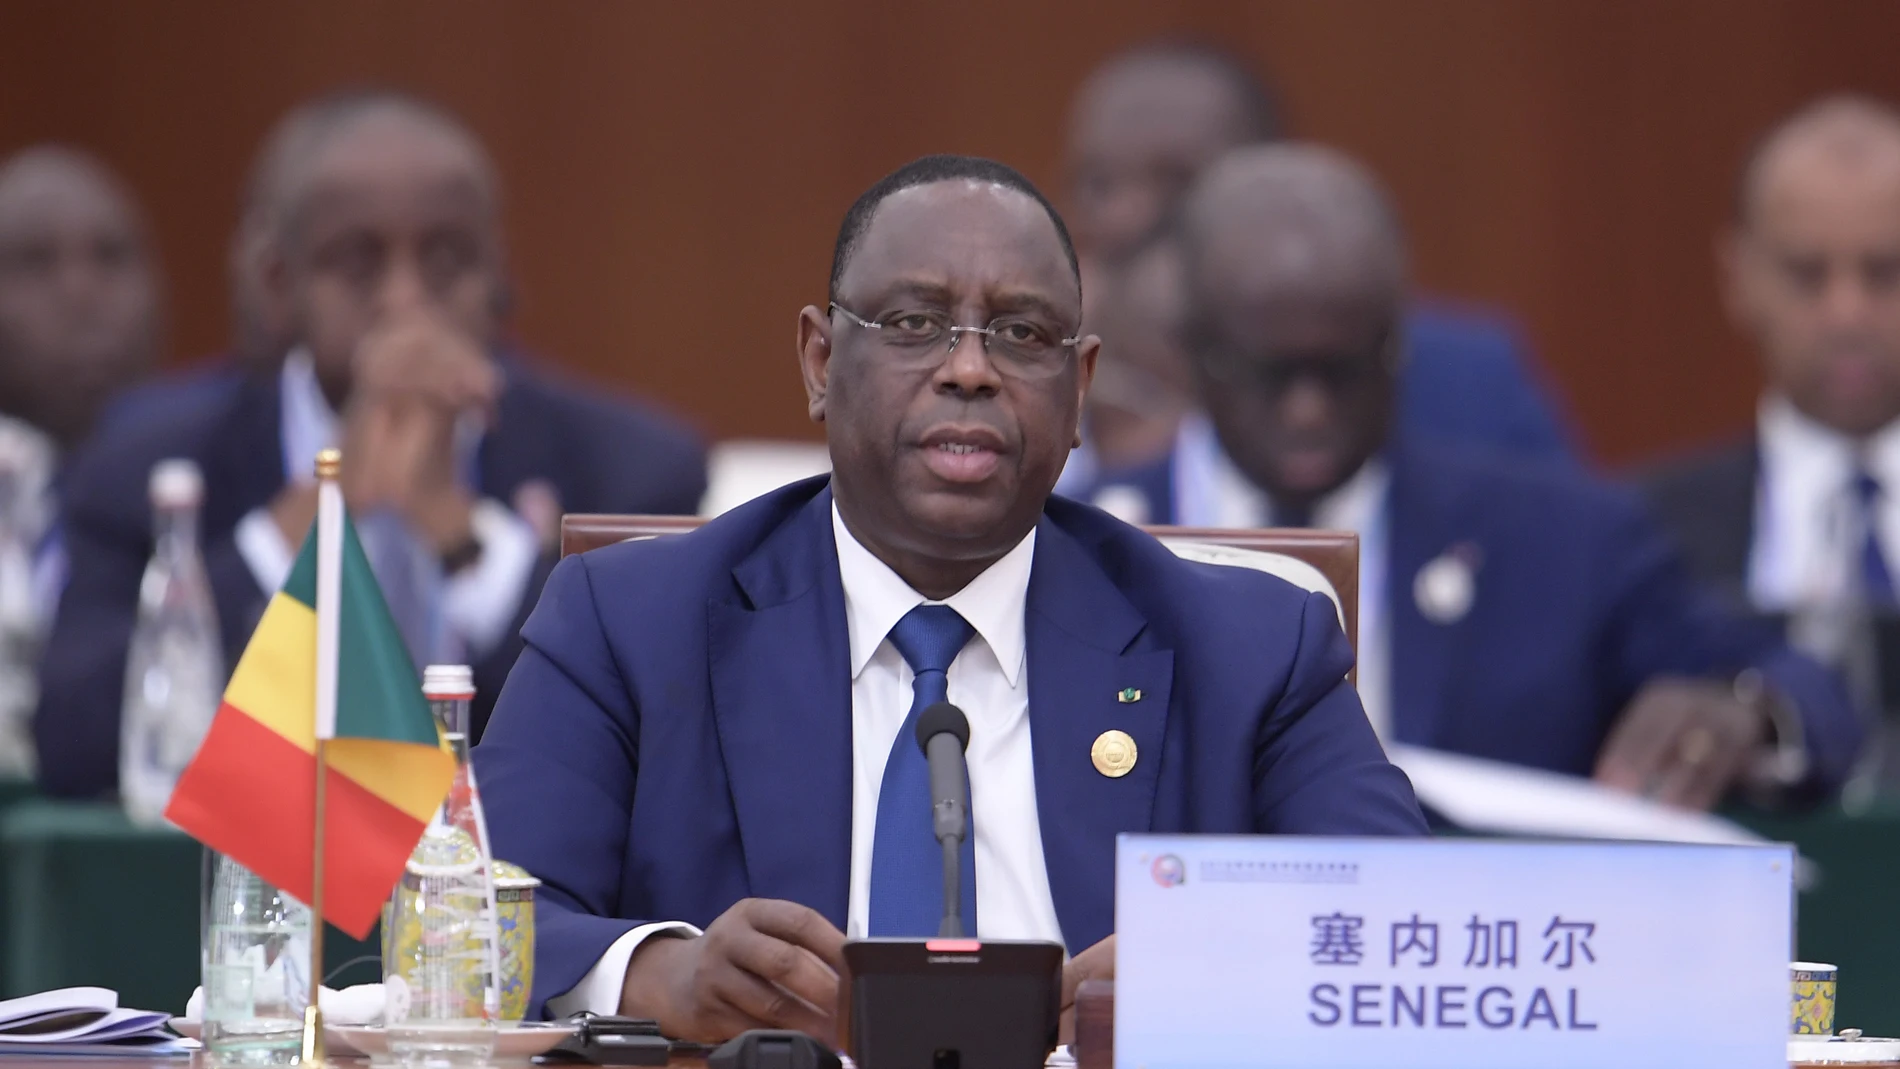 BEIJING, Sept. 4, 2018 Senegalese President Macky Sall attends a round table of the 2018 Beijing Summit of the Forum on China-Africa Cooperation (FOCAC) in Beijing, capital of China, Sept. 4, 2018. mcg) (Foto de ARCHIVO) 04/09/2018